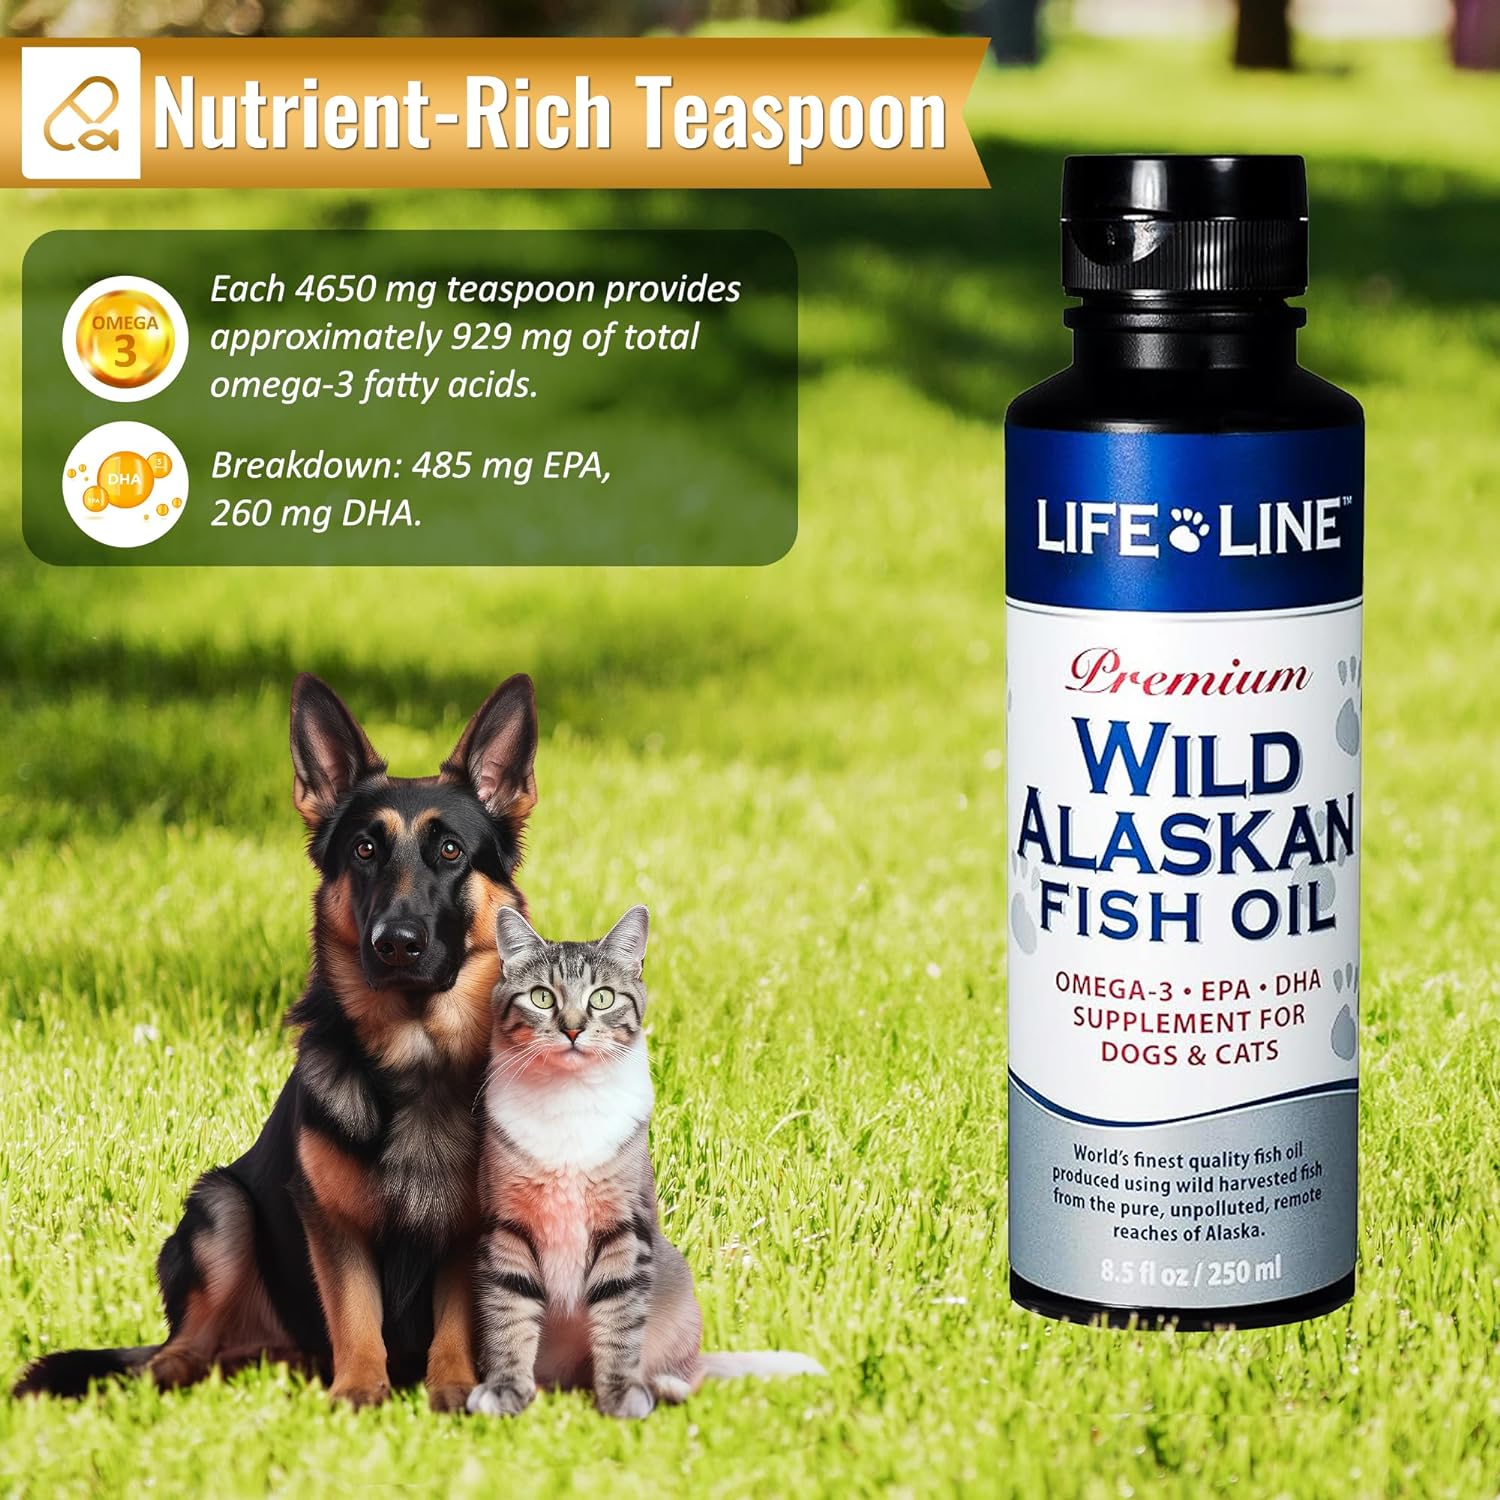 Life Line Pet Nutrition Wild Alaskan Fish Oil Omega-3 Supplement for Skin & Coat – Supports Brain, Eye & Heart Health in Dogs & Cats, 8.5oz : Pet Supplies